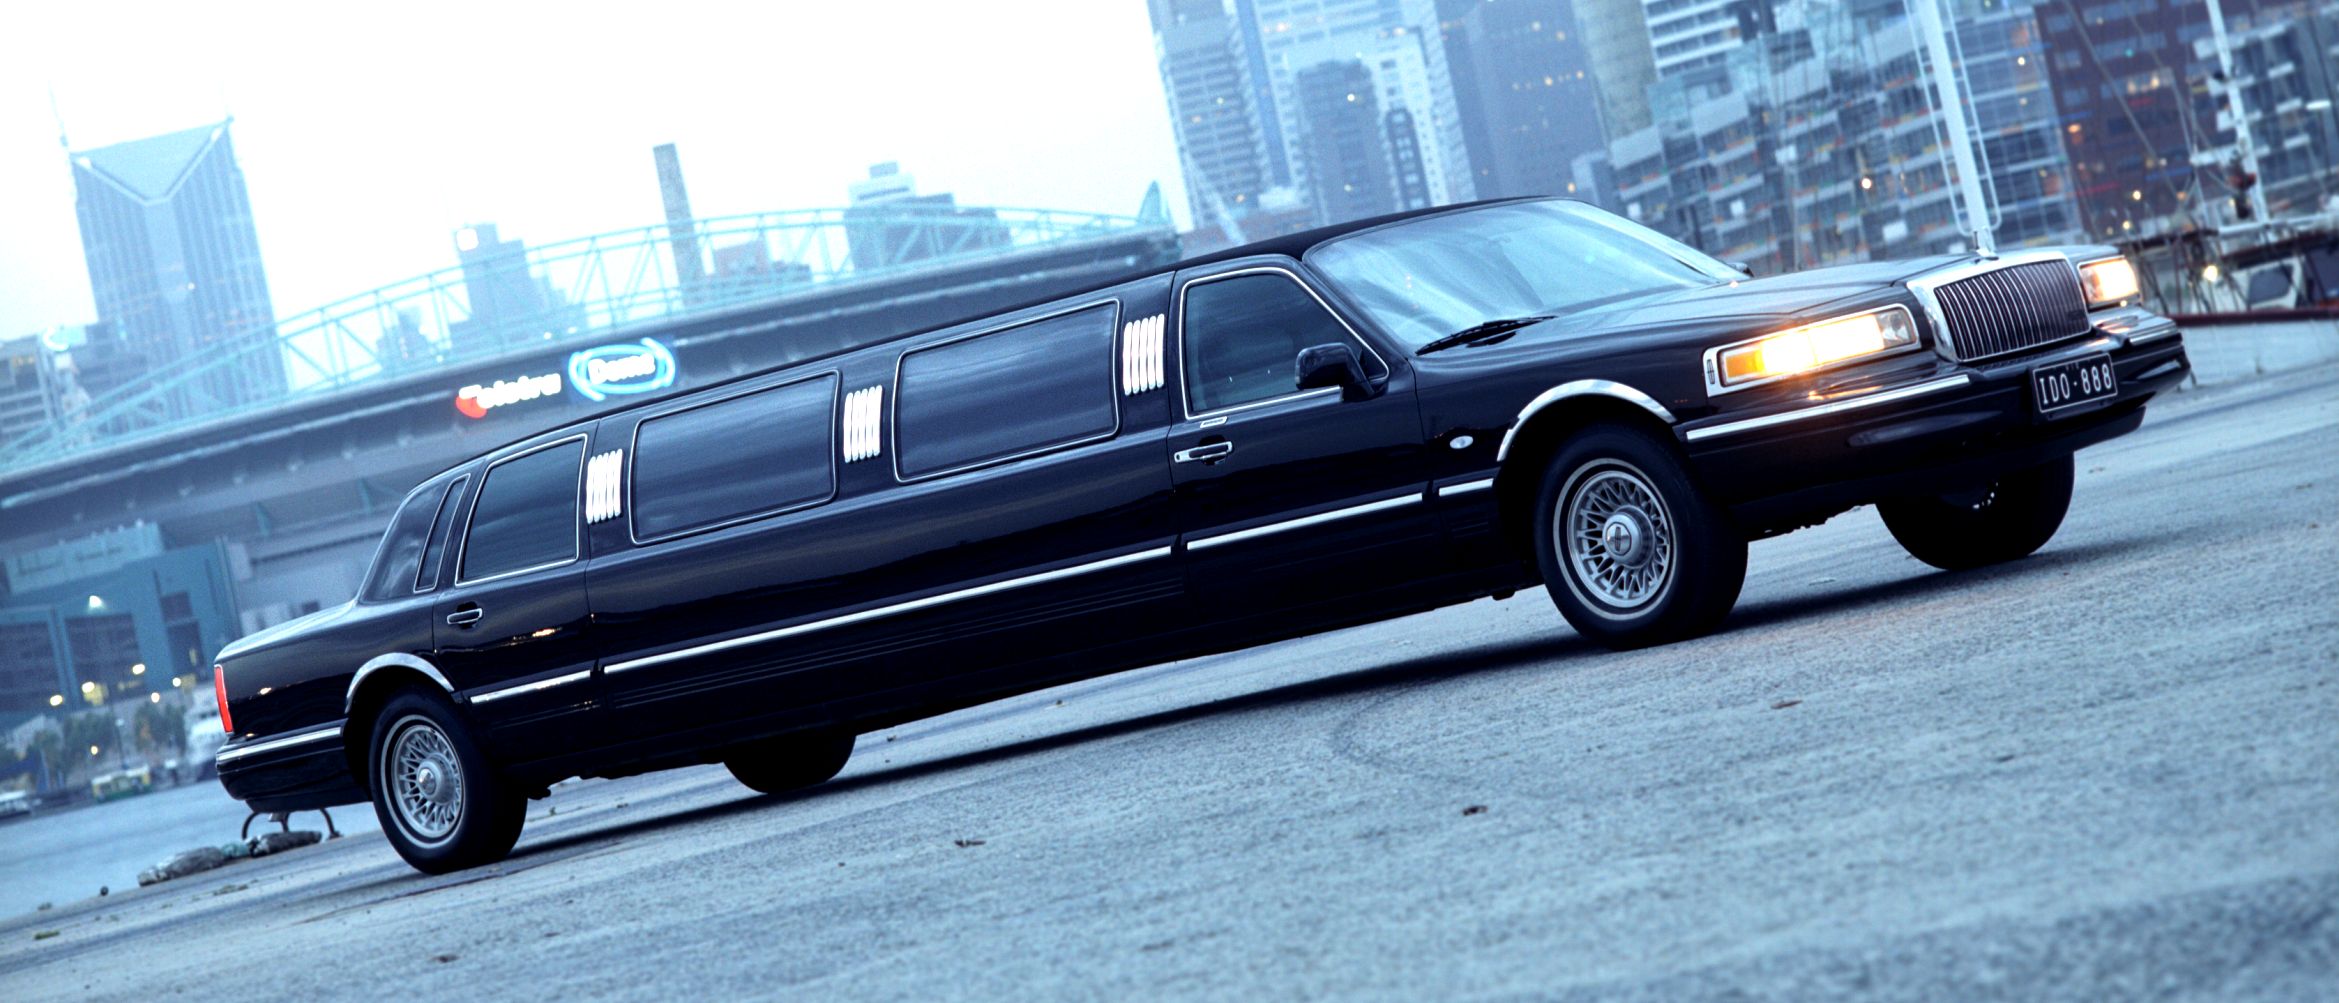 12 Seater chrysler limo hire melbourne #1